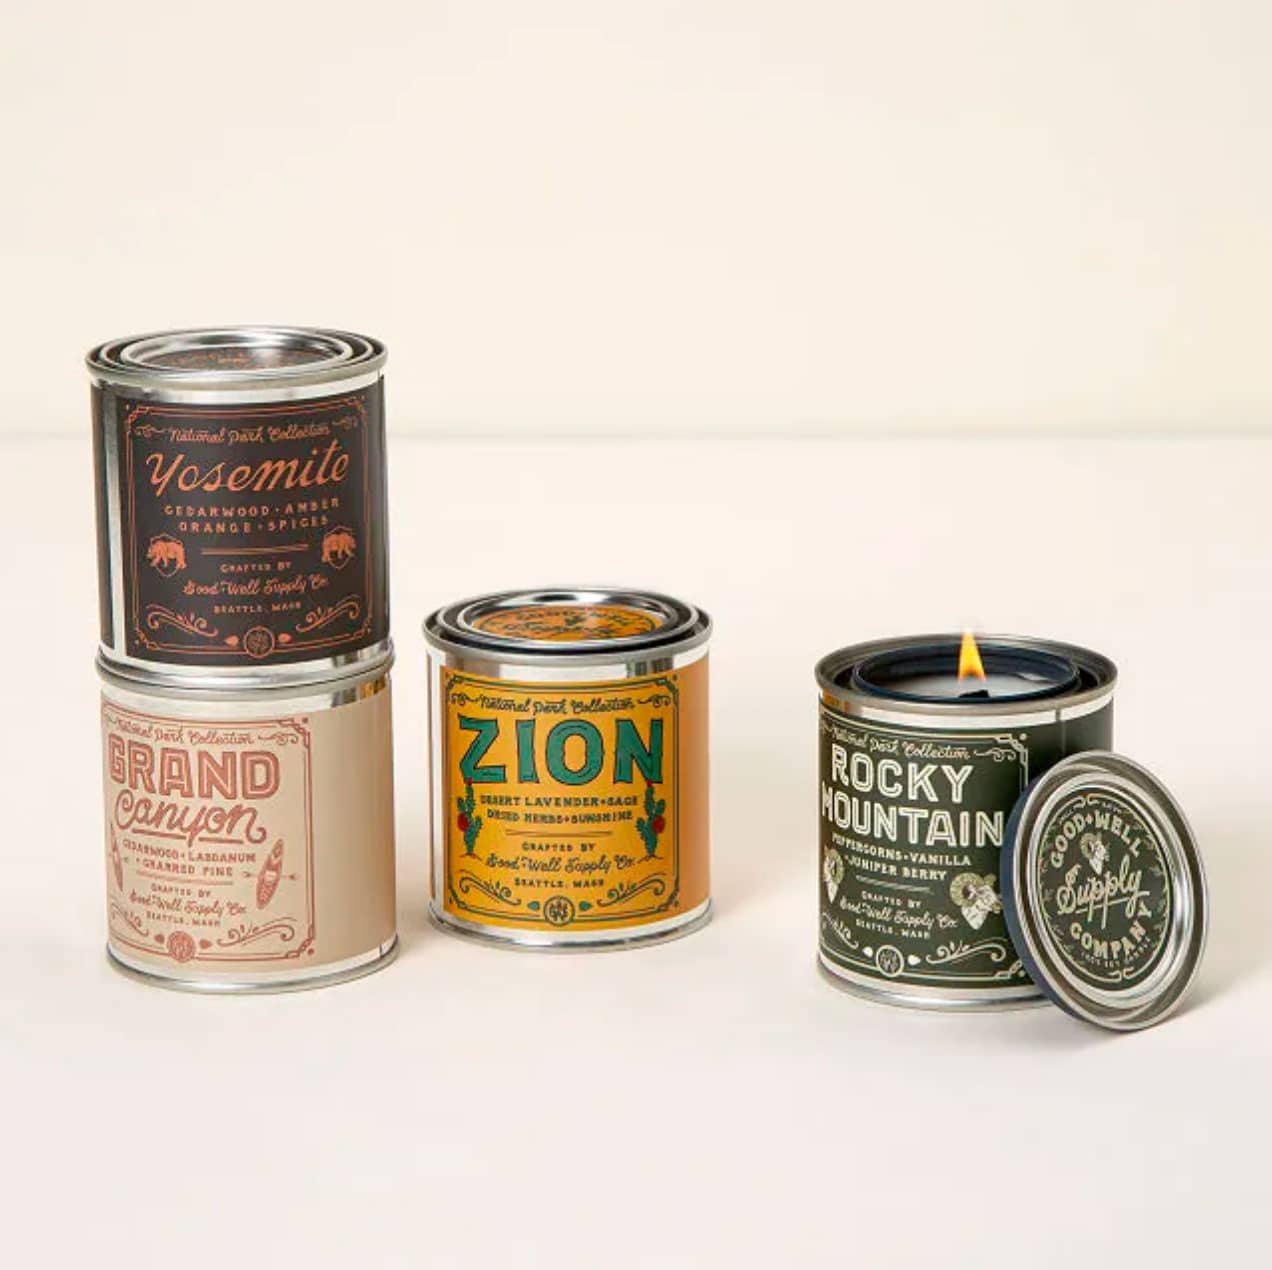 National park scented candles in camping tins